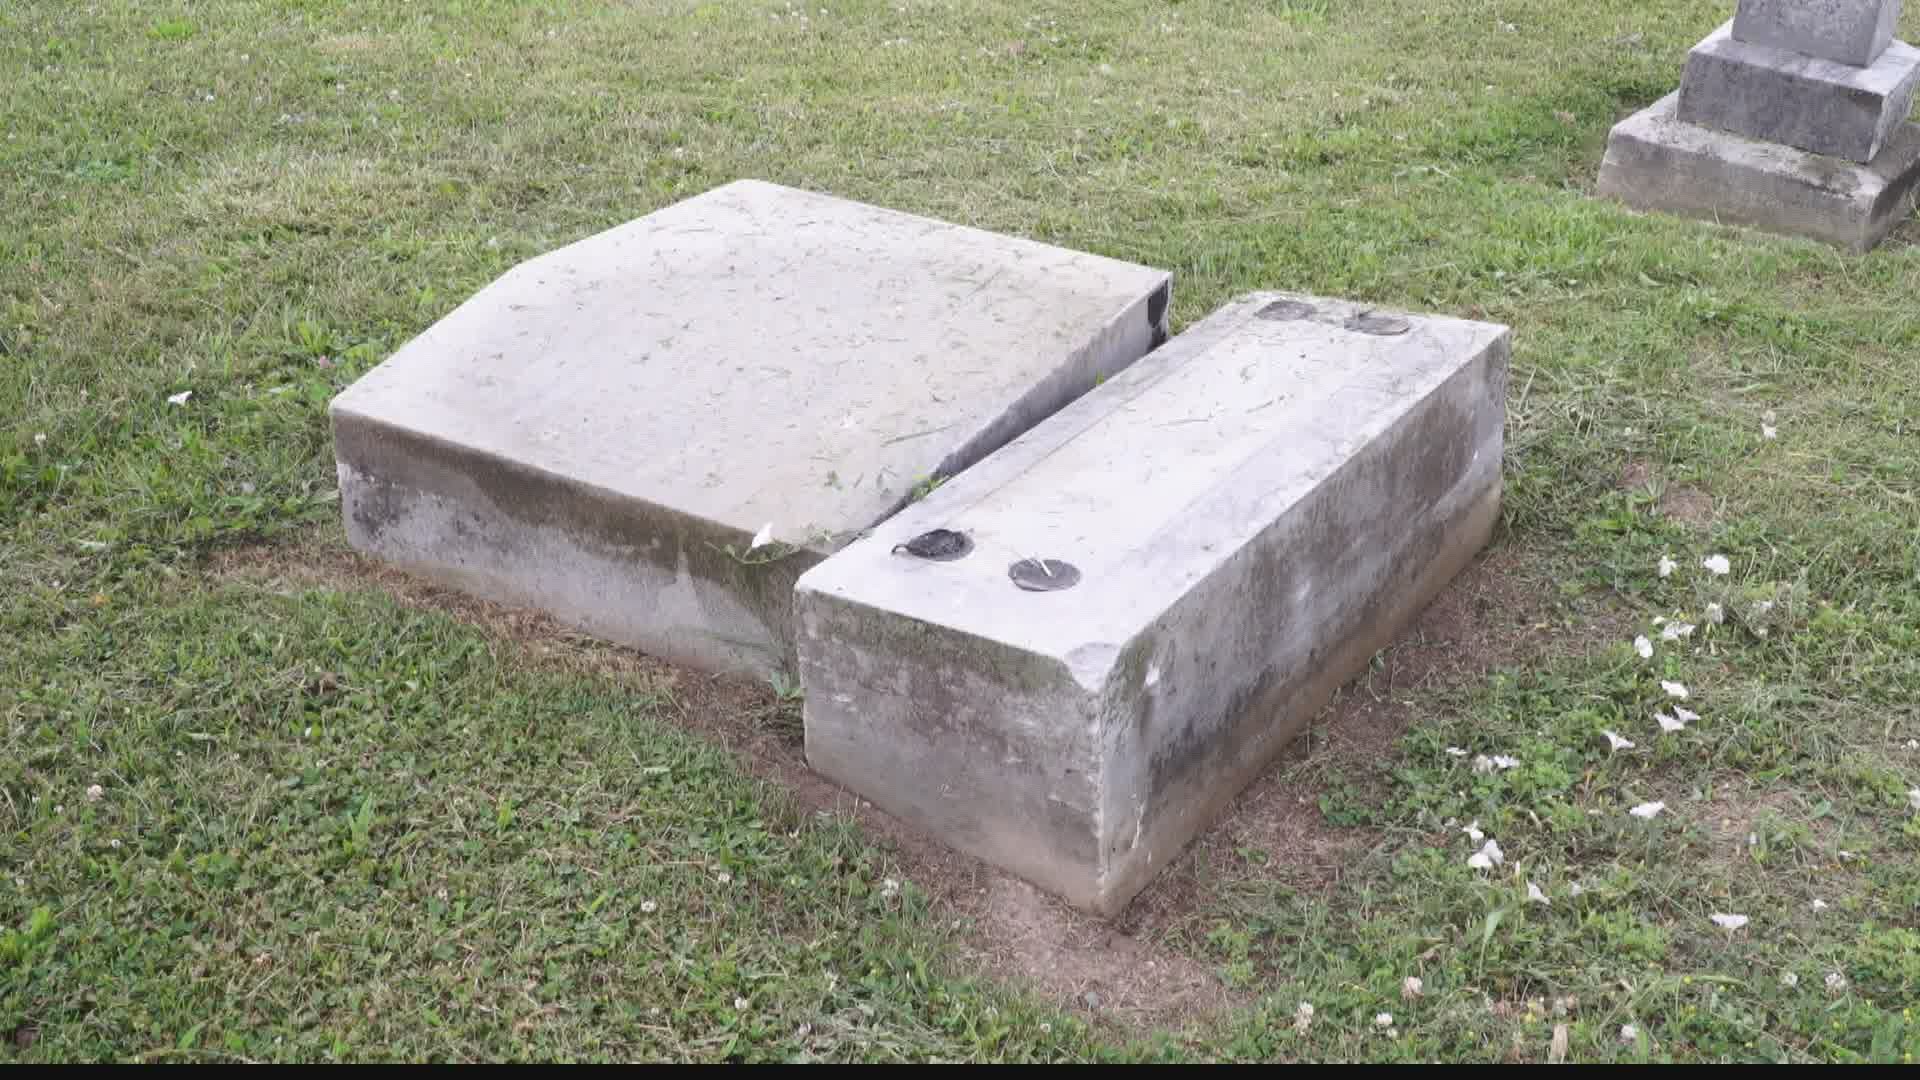 Police say children as young as 5-years-old are responsible for damaging headstones in an Elwood cemetery.